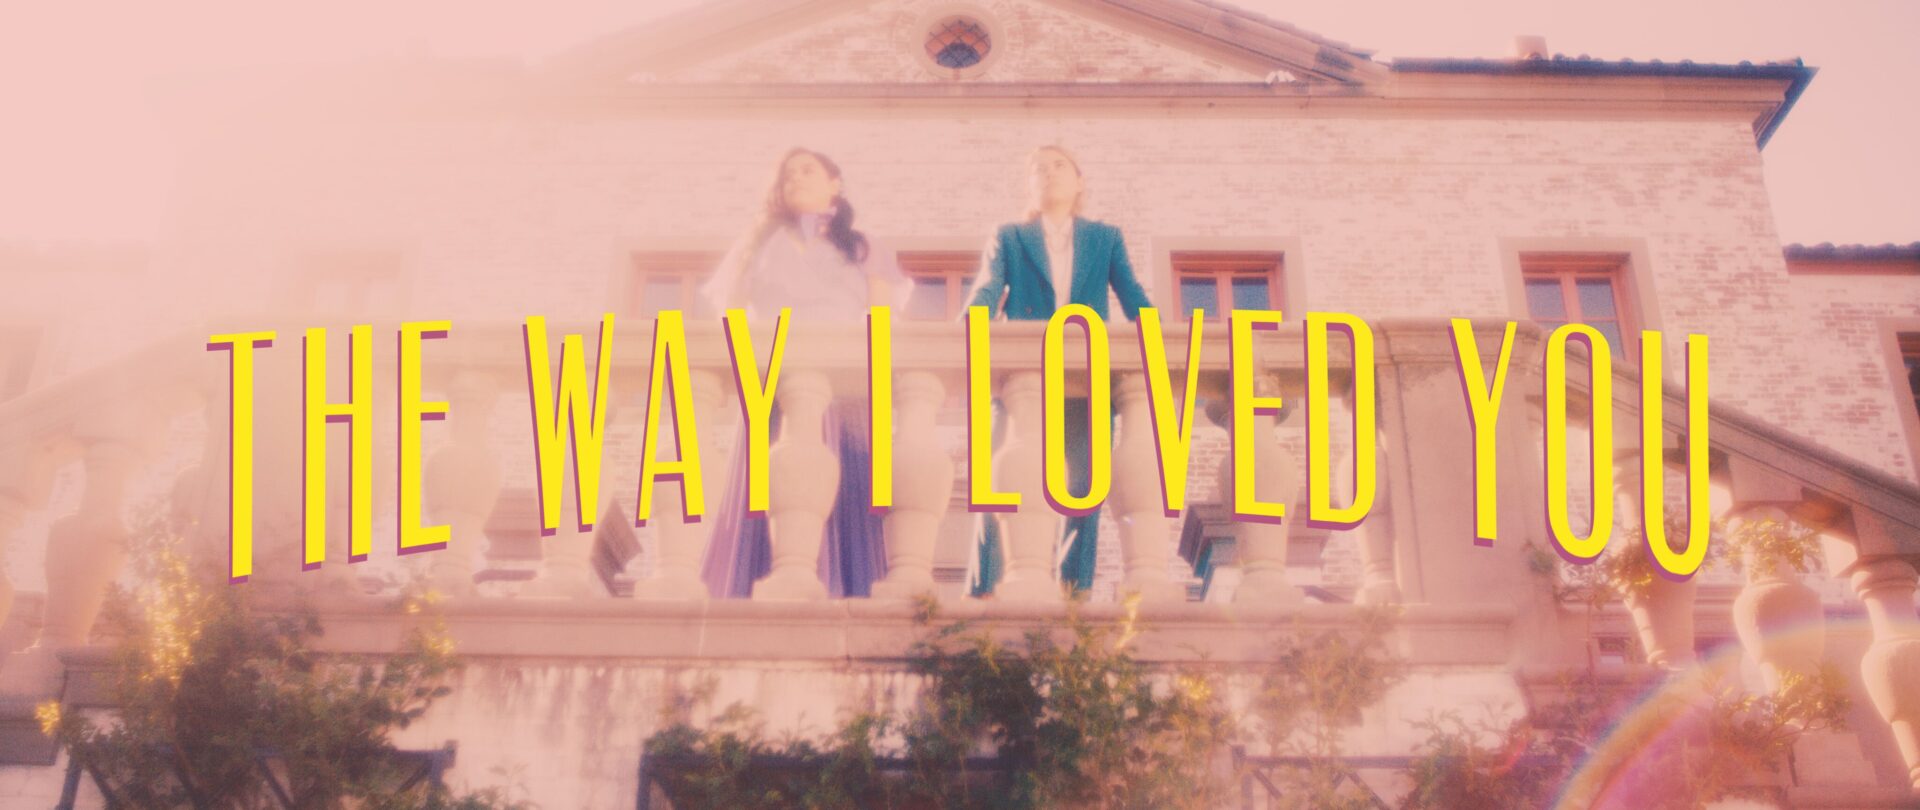 REYNA releases telenovela inspired visuals for “The Way I Loved You”